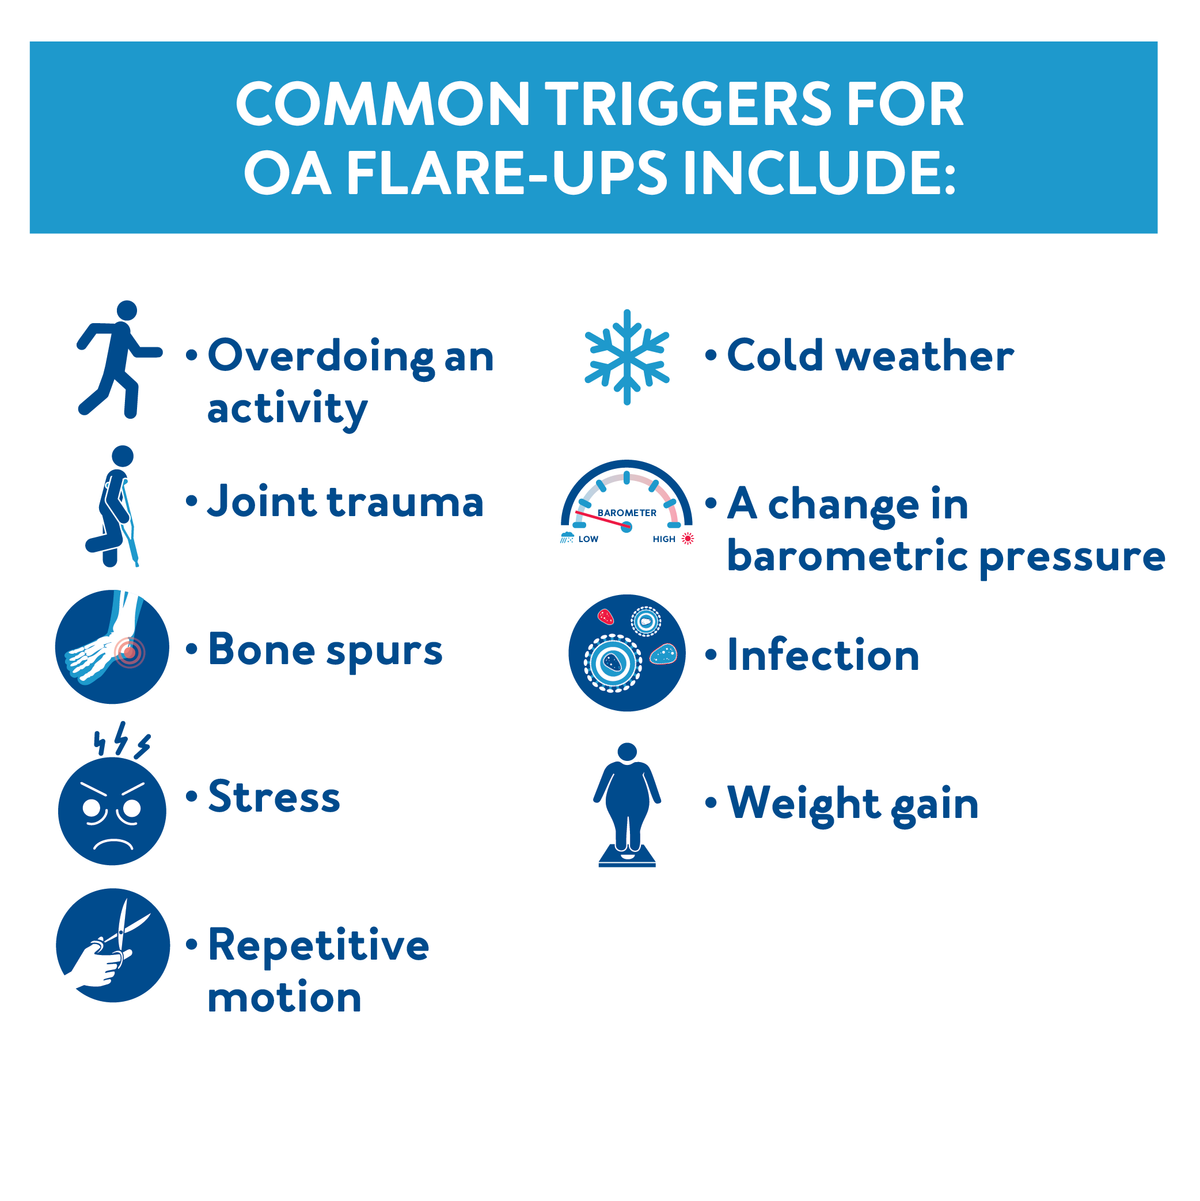 Common triggers for osteoarthritis flare-ups